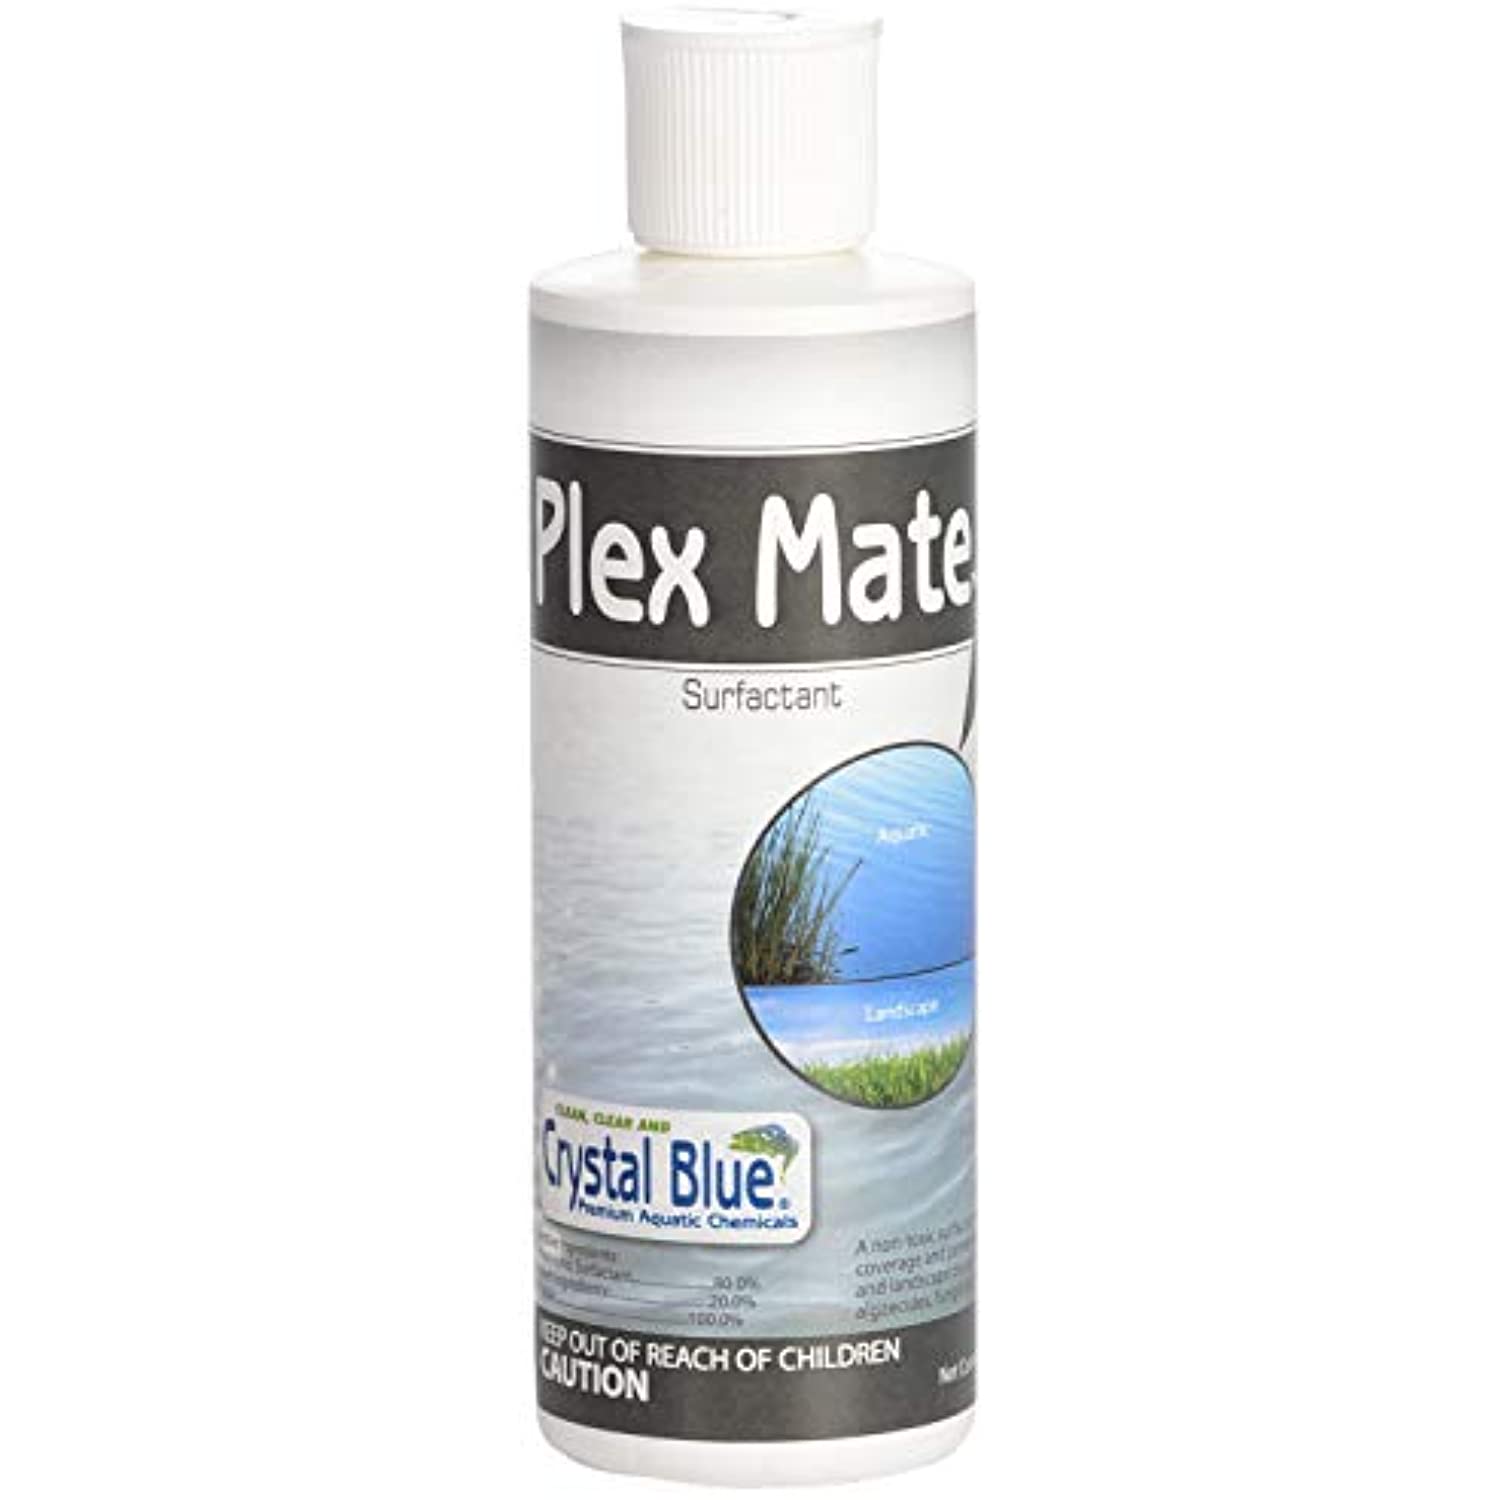 Crystal Blue Plex Mate Aquatic Surfactant for Herbicides - 8 Ounces - Non-Ionic, Increase Product Coverage, Increase Product Penetration, Increase Product Effectiveness